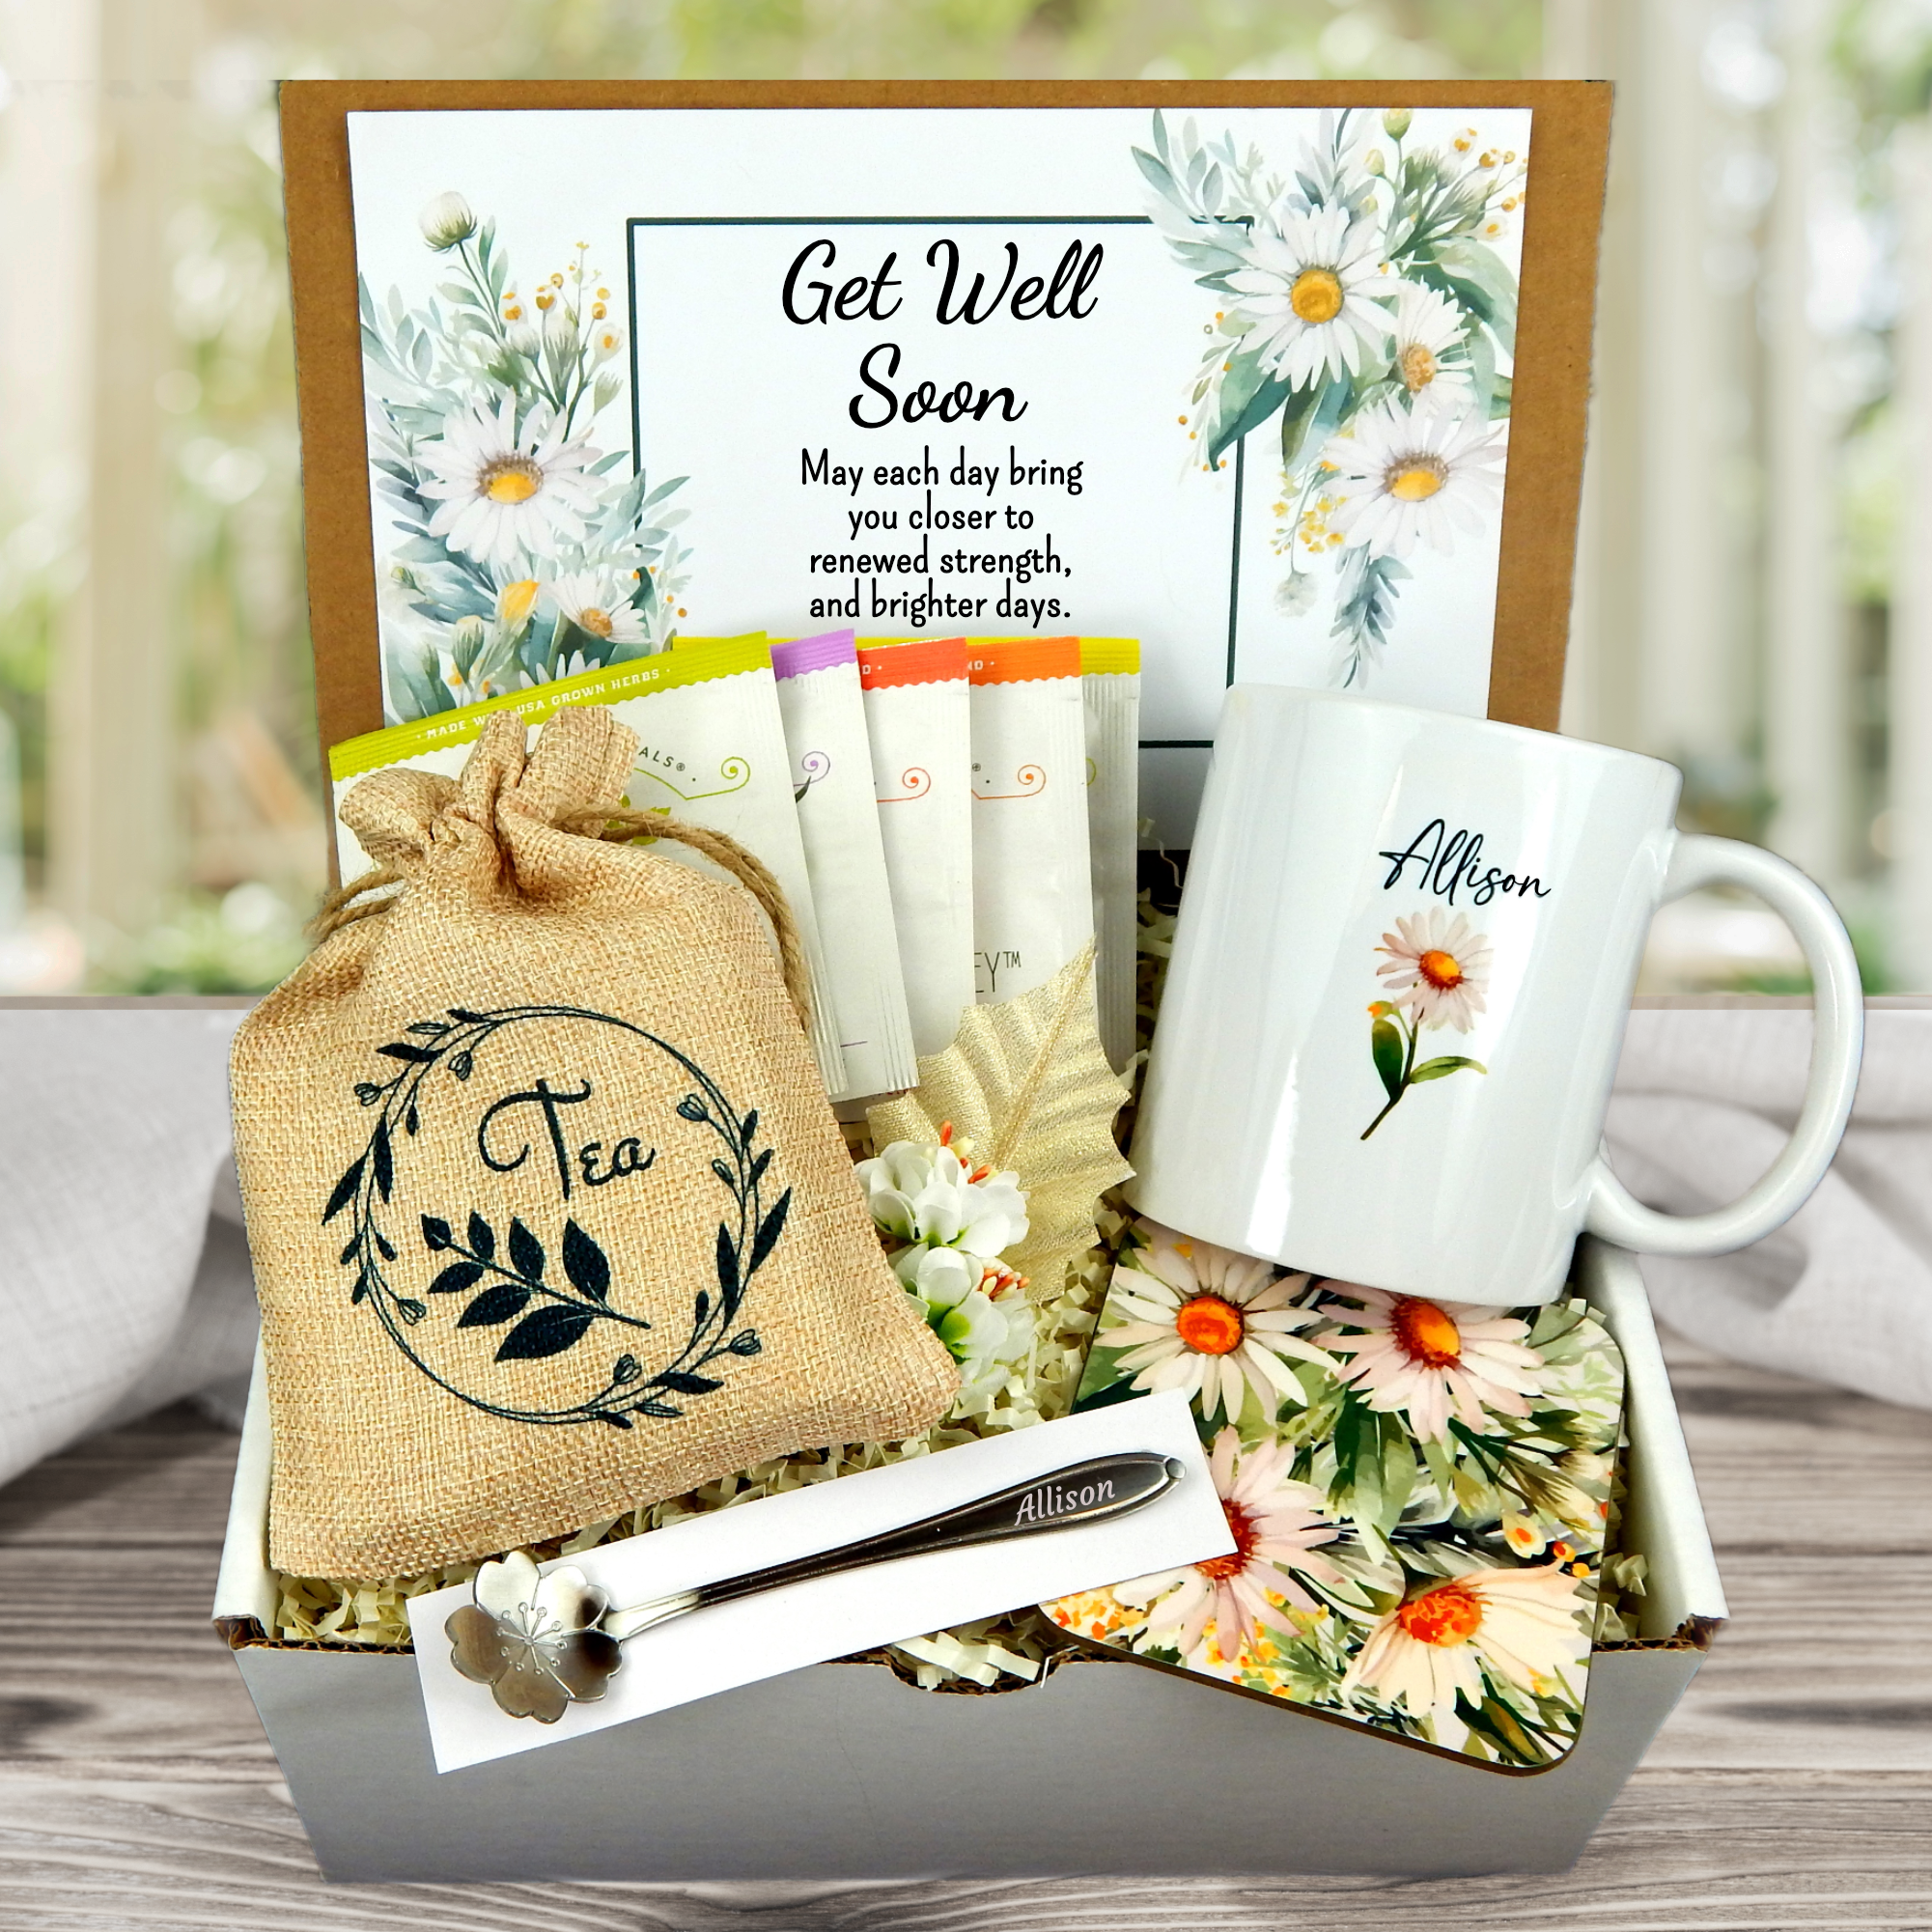 Get Well Soon Gift Care Package with Healing Herbal Teas for a Speedy –  Blue Stone River